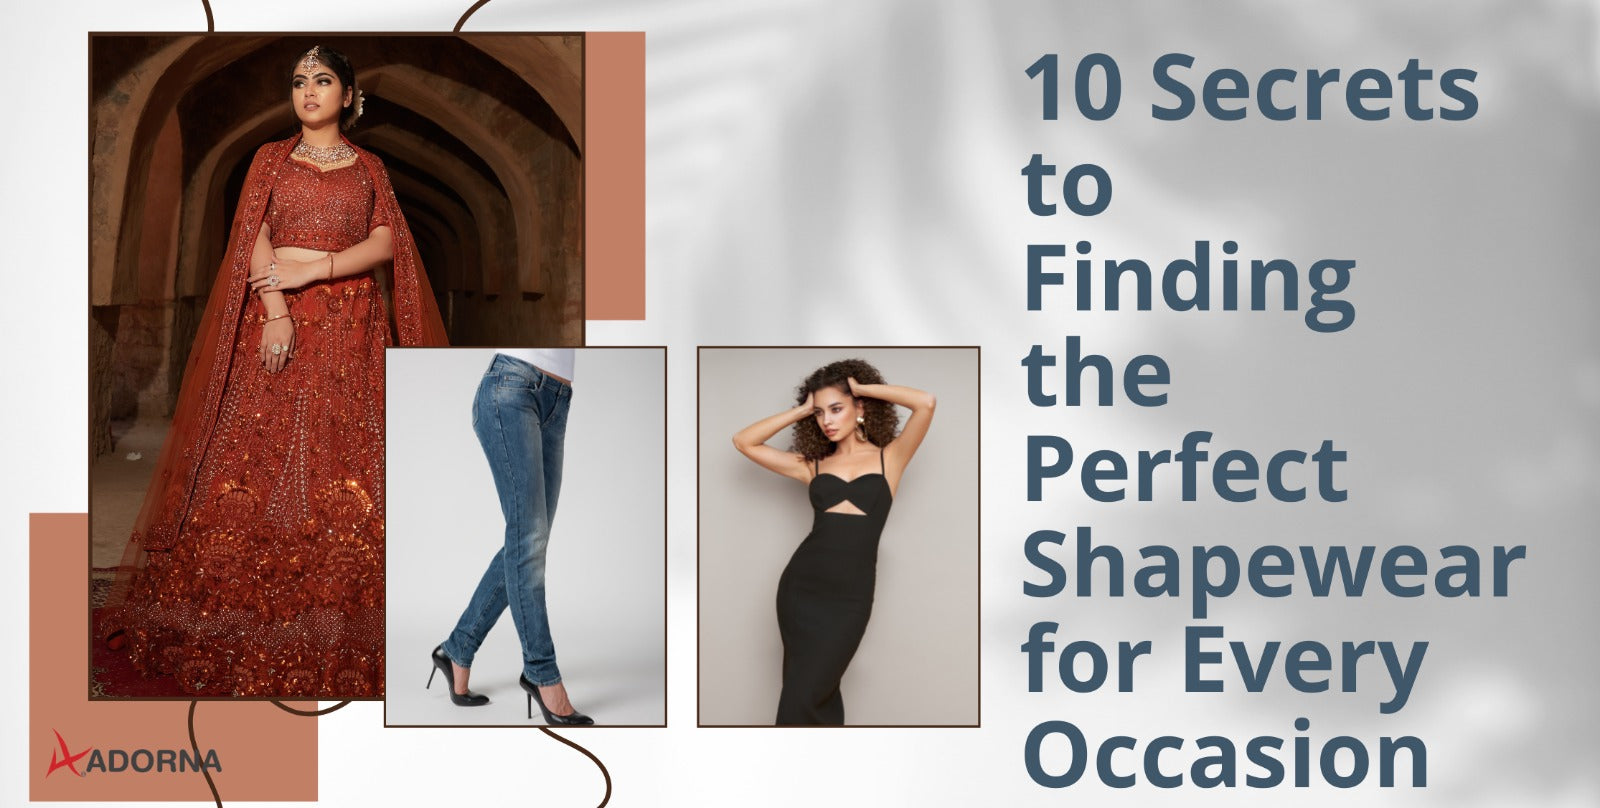 Find the perfect Shapewear!